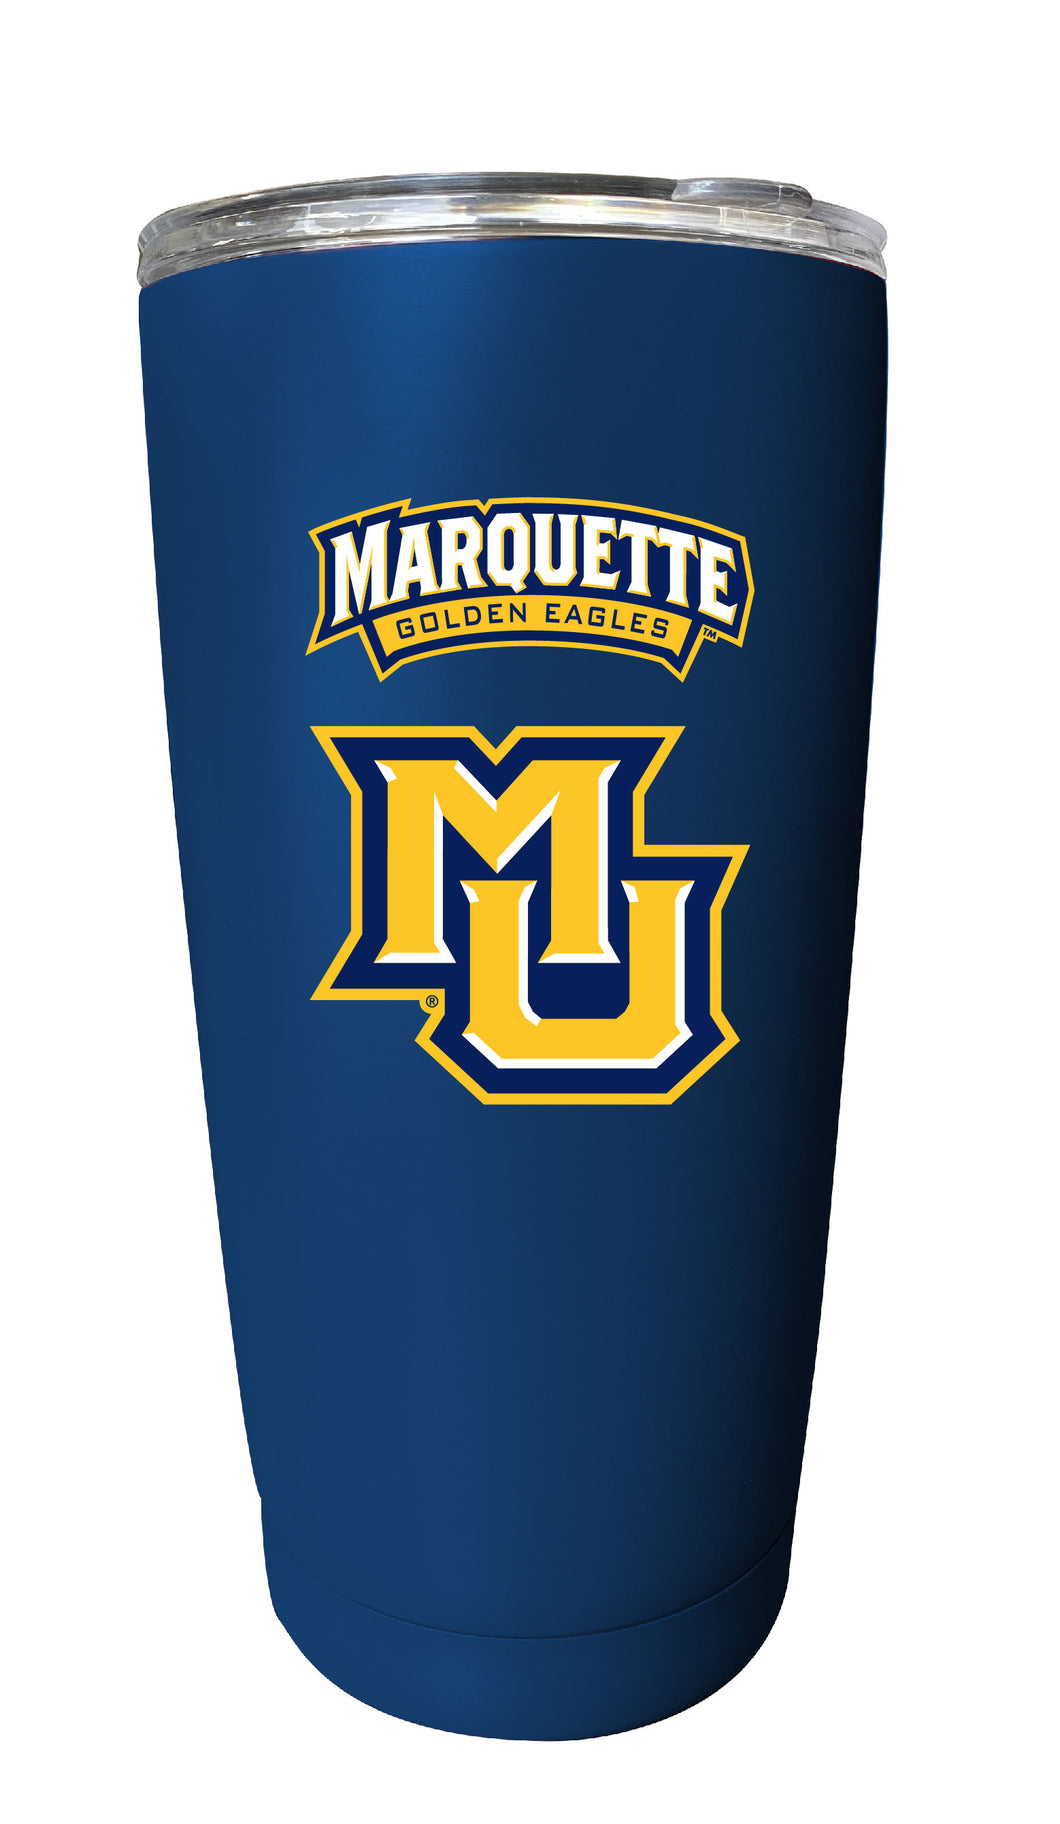 Marquette Golden Eagles 16 oz Insulated Stainless Steel Tumbler - Choose Your Color.